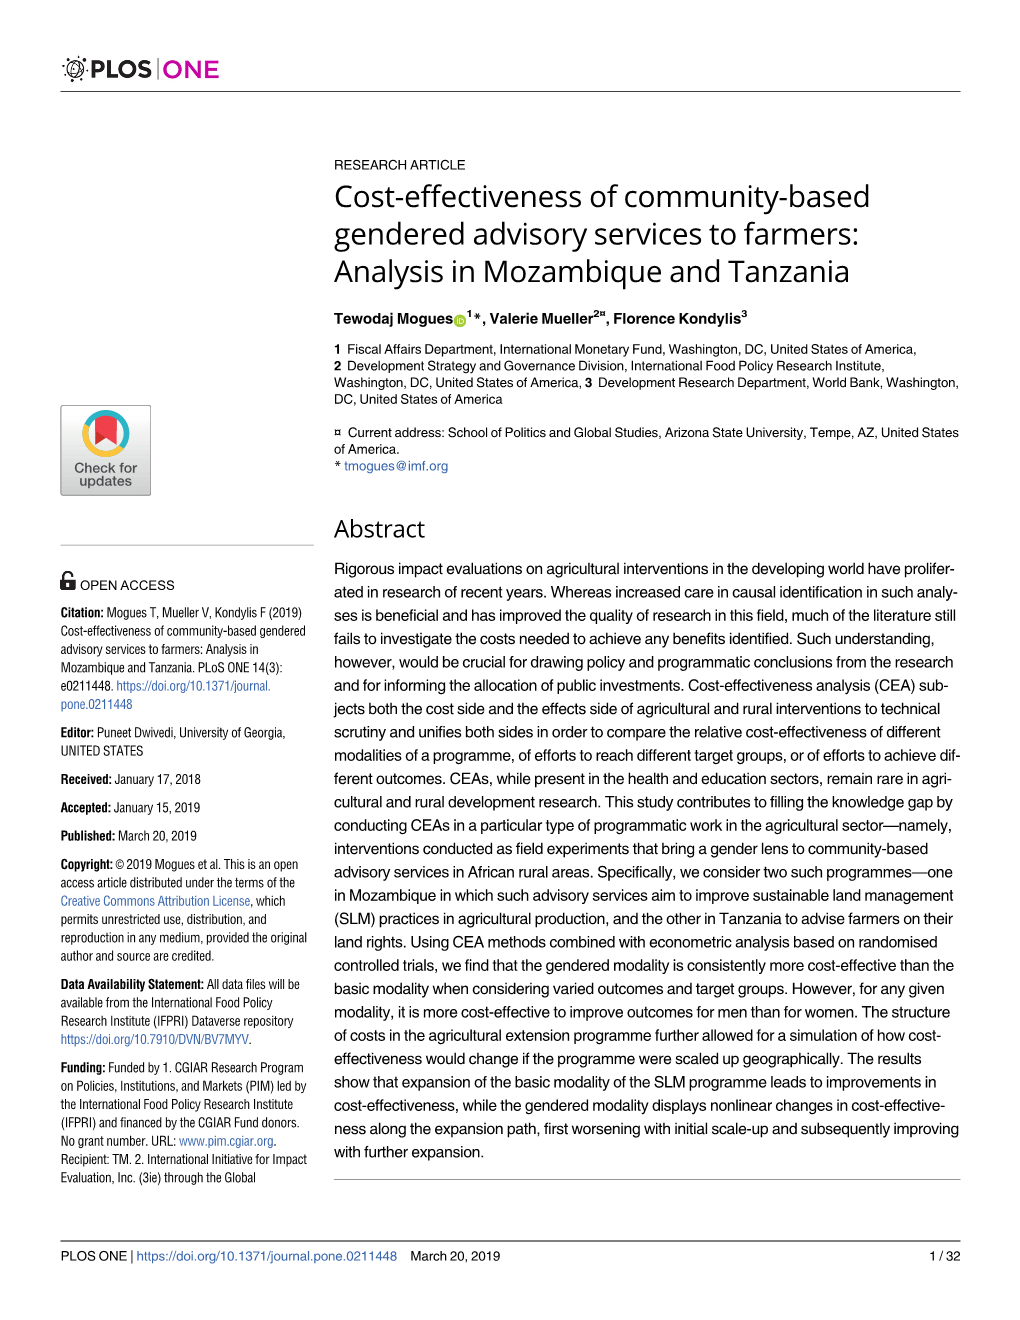 Cost-Effectiveness of Community-Based Gendered Advisory Services to Farmers: Analysis in Mozambique and Tanzania